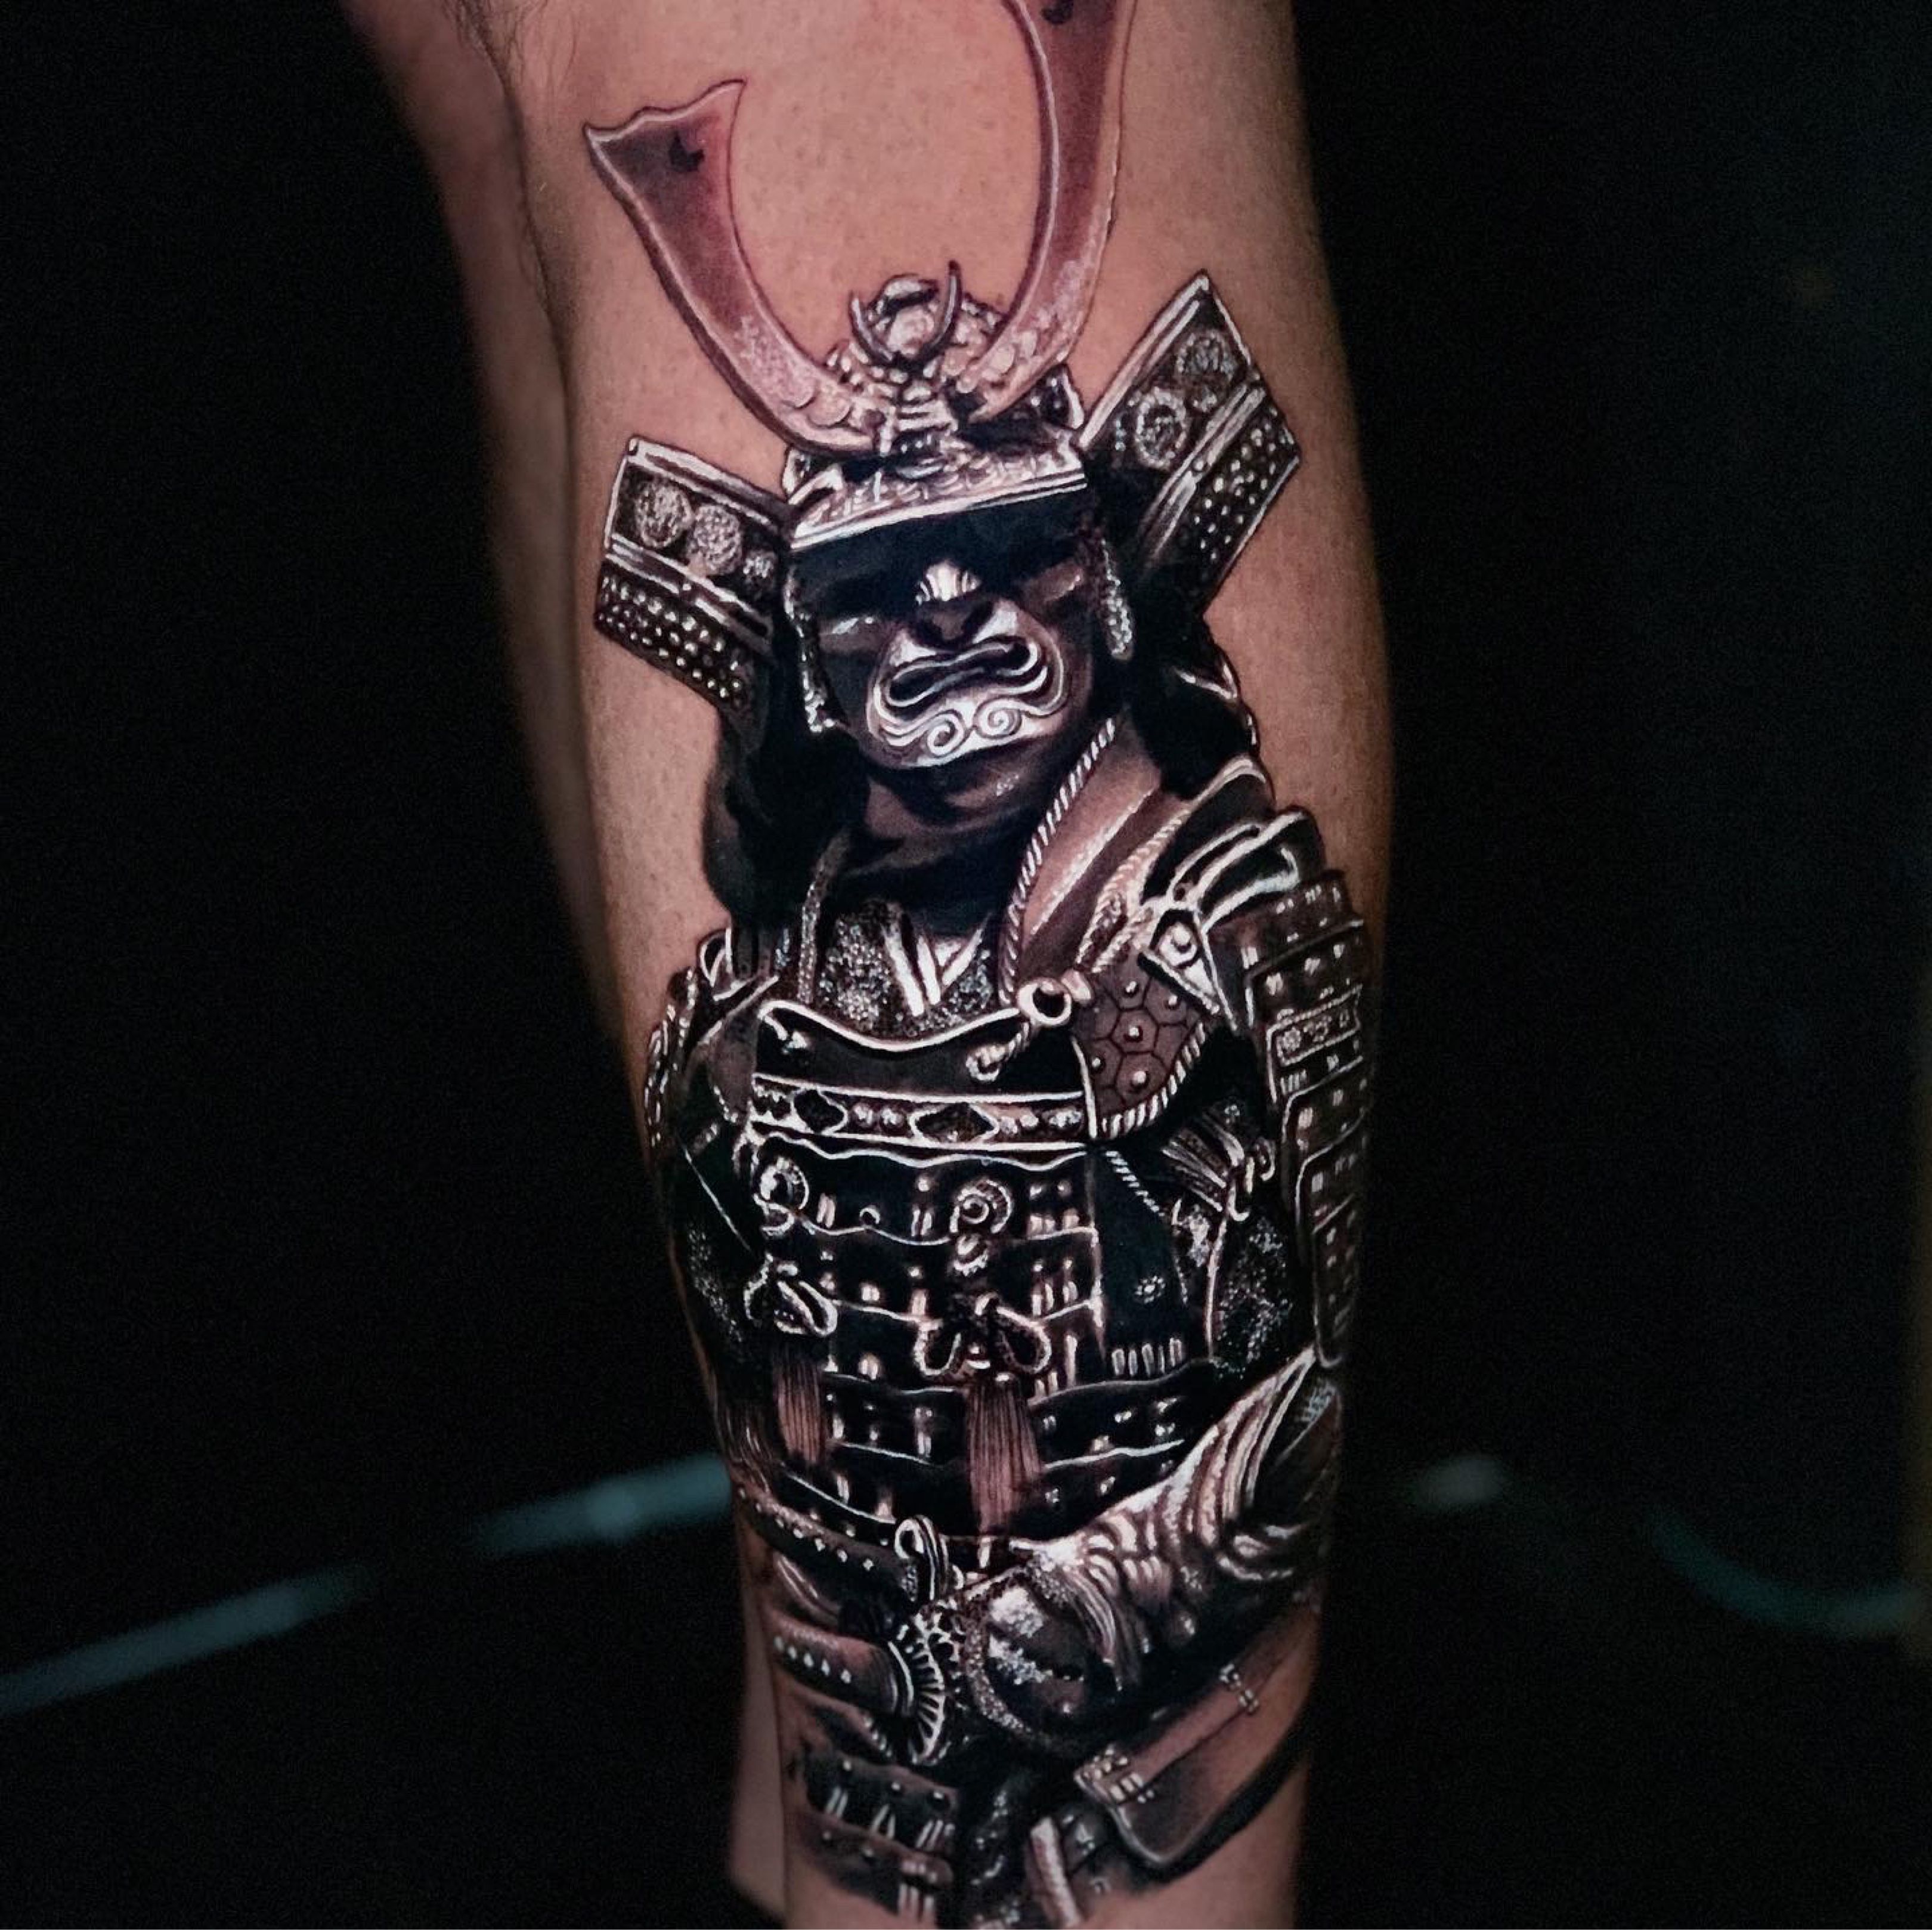 Iron Mountain Tattoo - Samurai tattoo by Brad Mariachi. Brad will be taking  walk-ins today so come down and get a new tattoo for the new year! |  Facebook